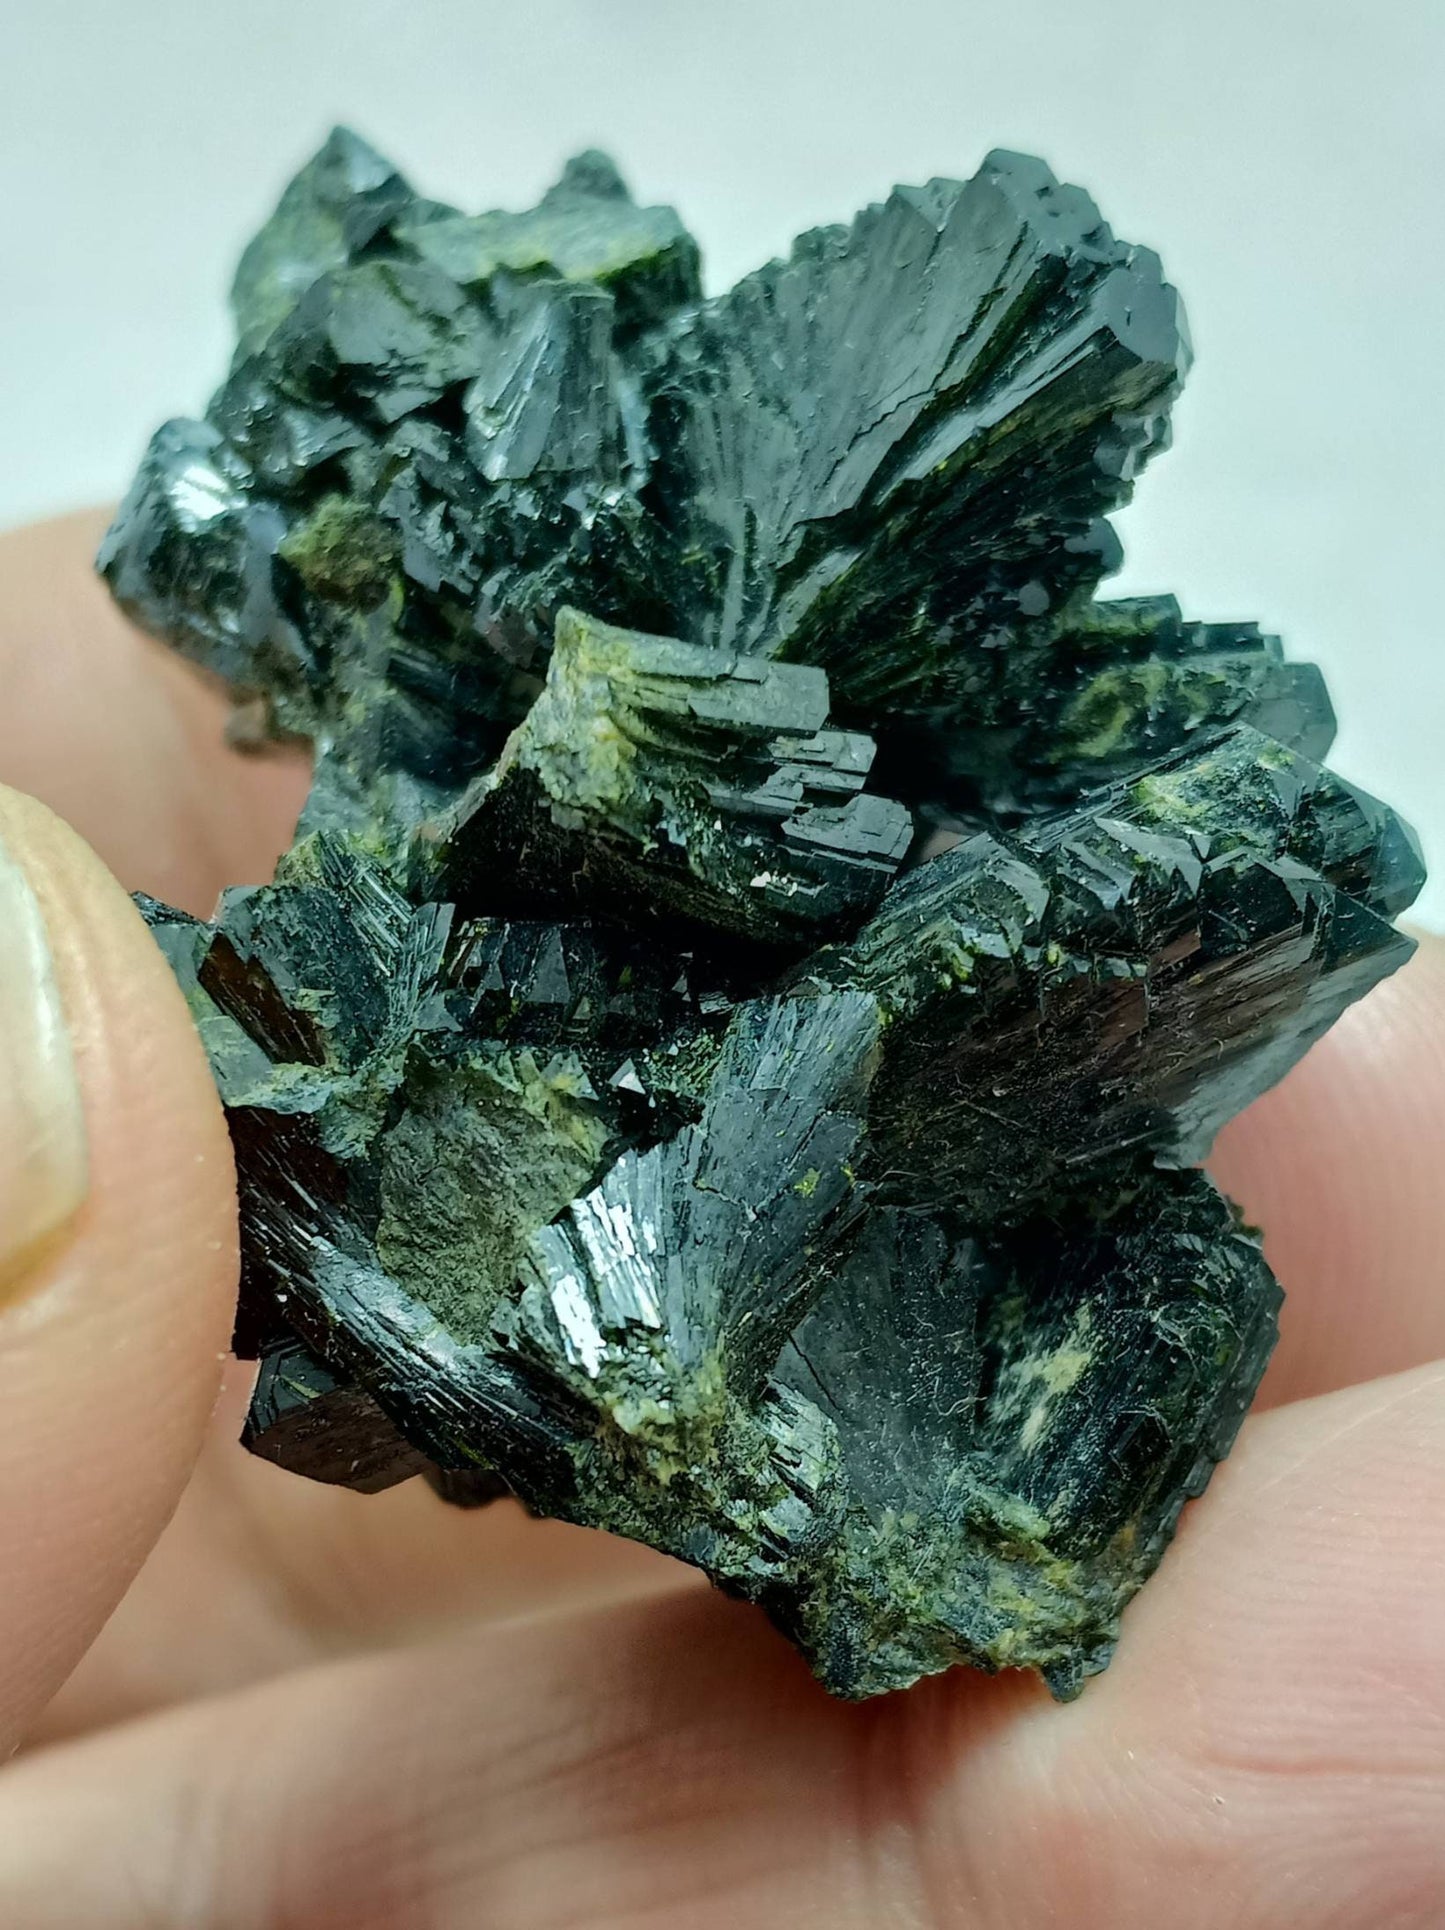 Bow tie Epidote cluster with beautiful terminations 42 grams